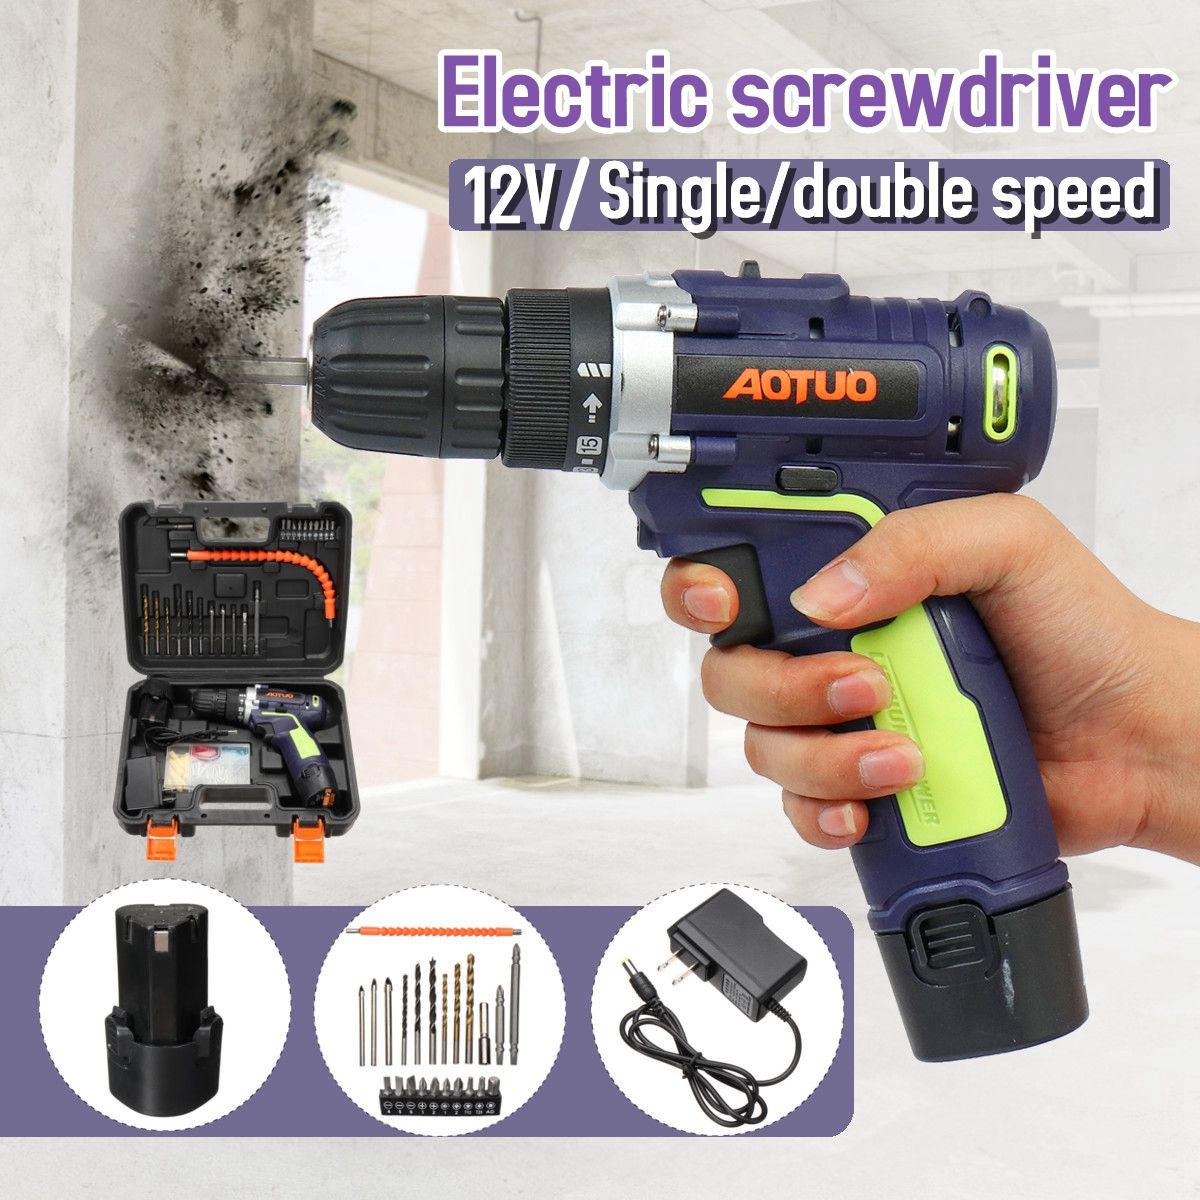 12V-78-in-1-Electric-Cordless-LED-Screwdriver-Drills-Bits-Rechargeable-Reversible-Drill-Tools-Kit-1319006